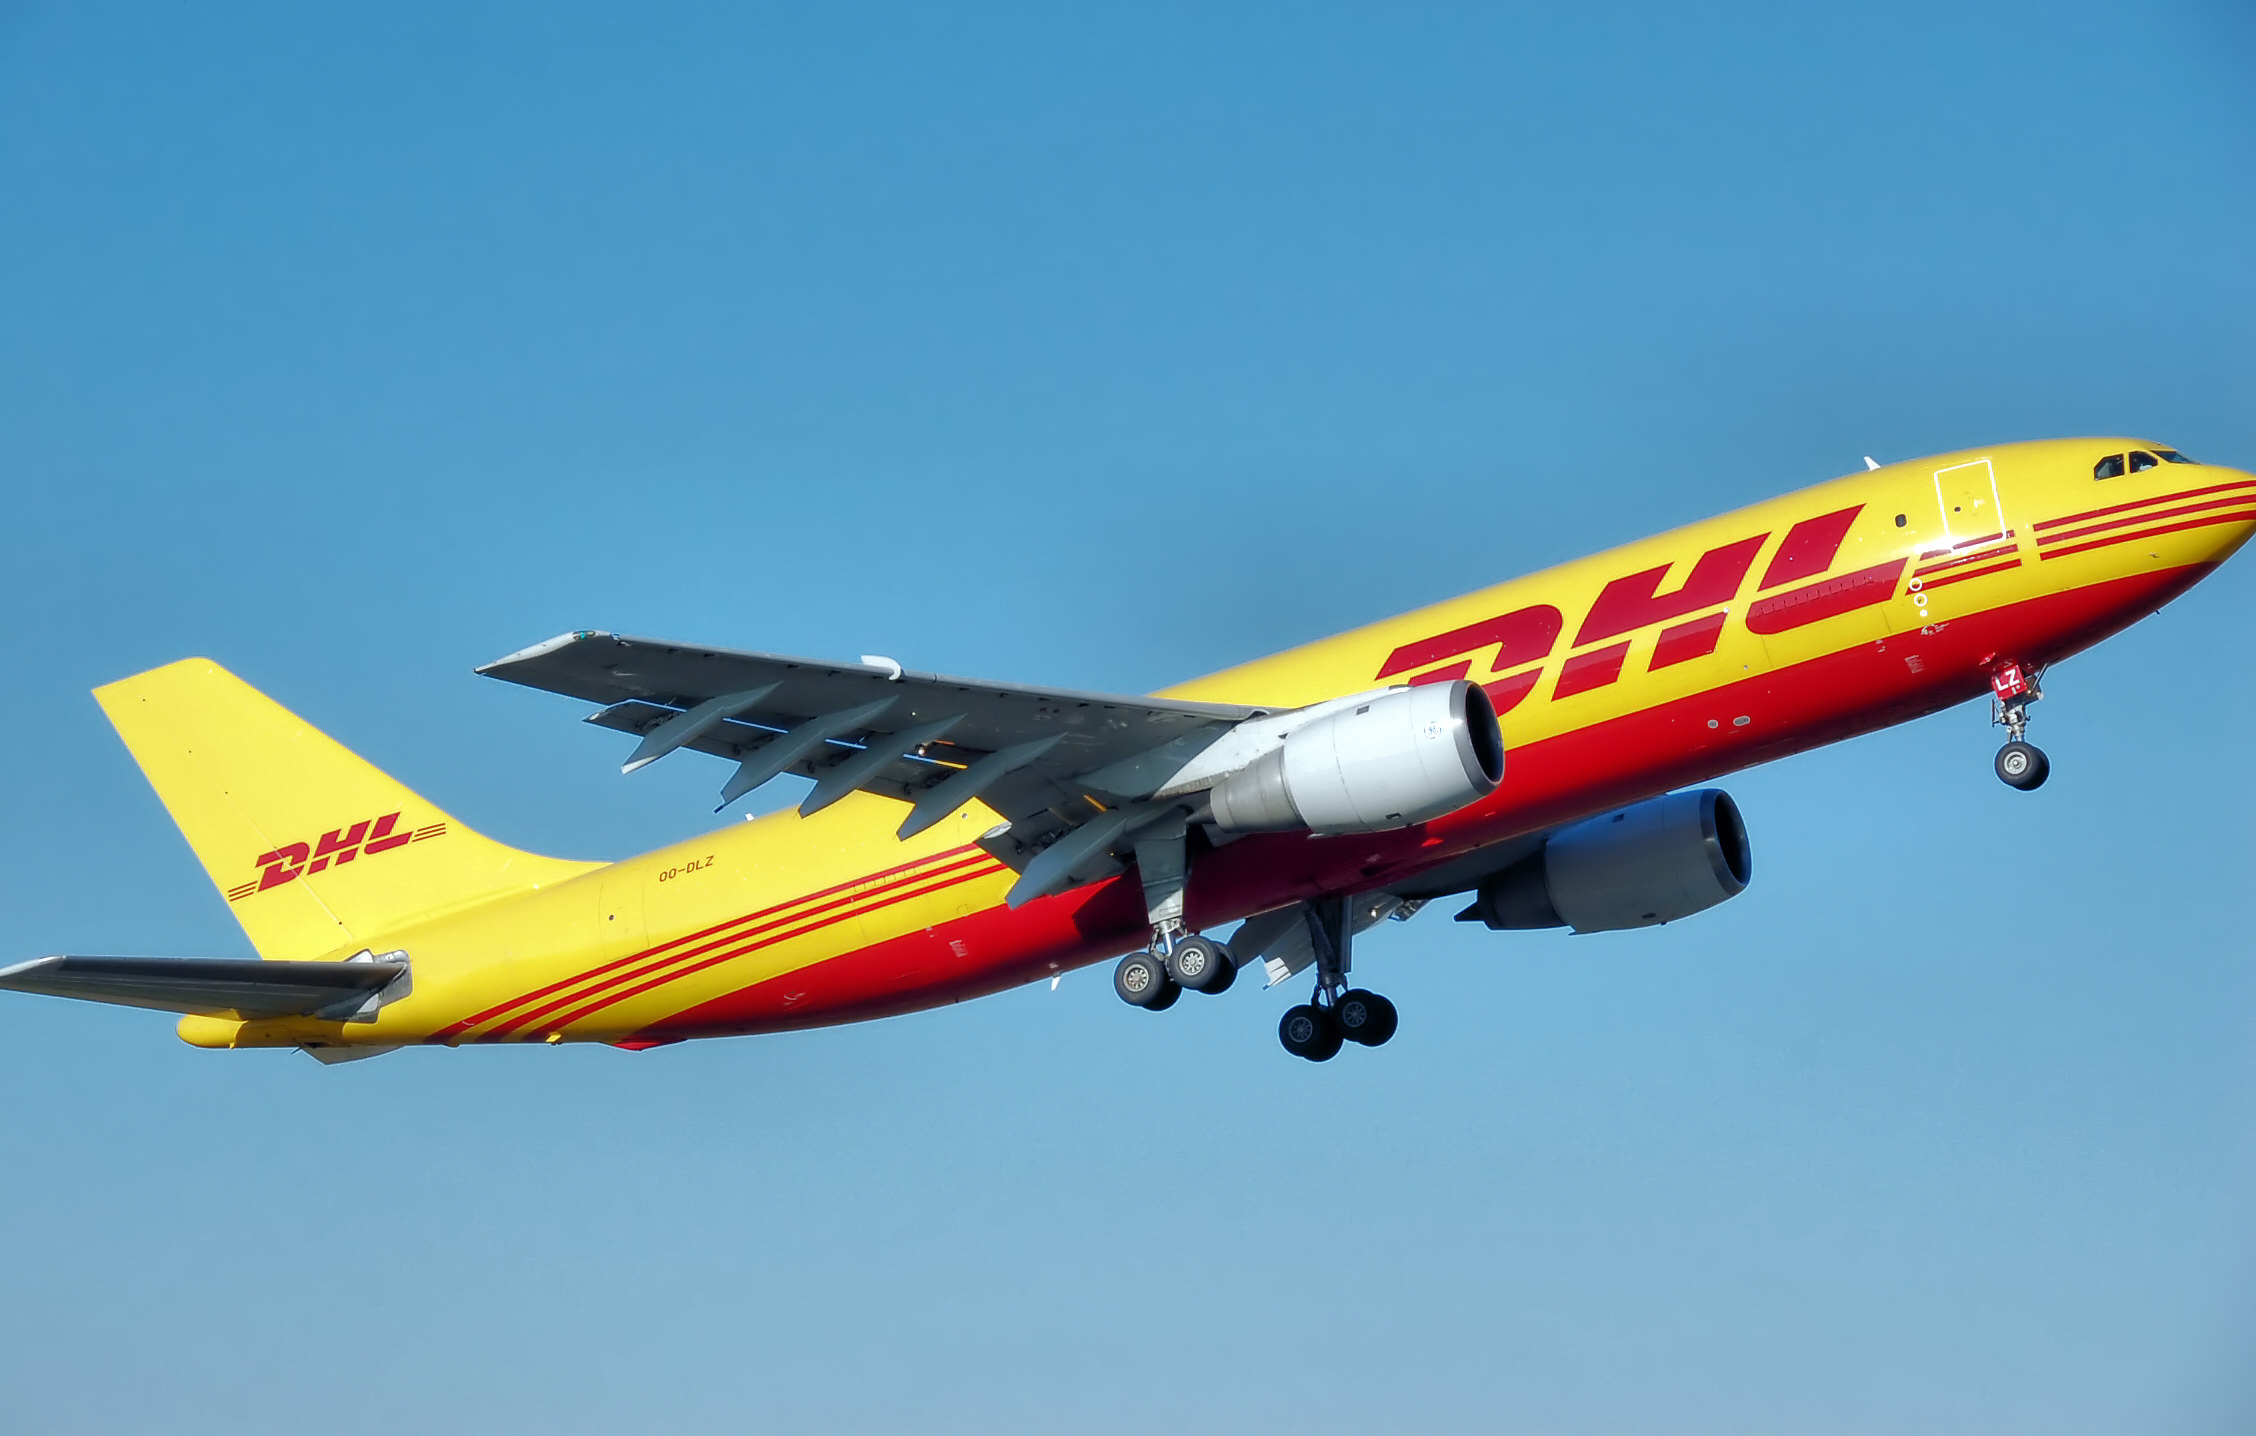 DHL Invests In Air Transport Facilities For West African Operations